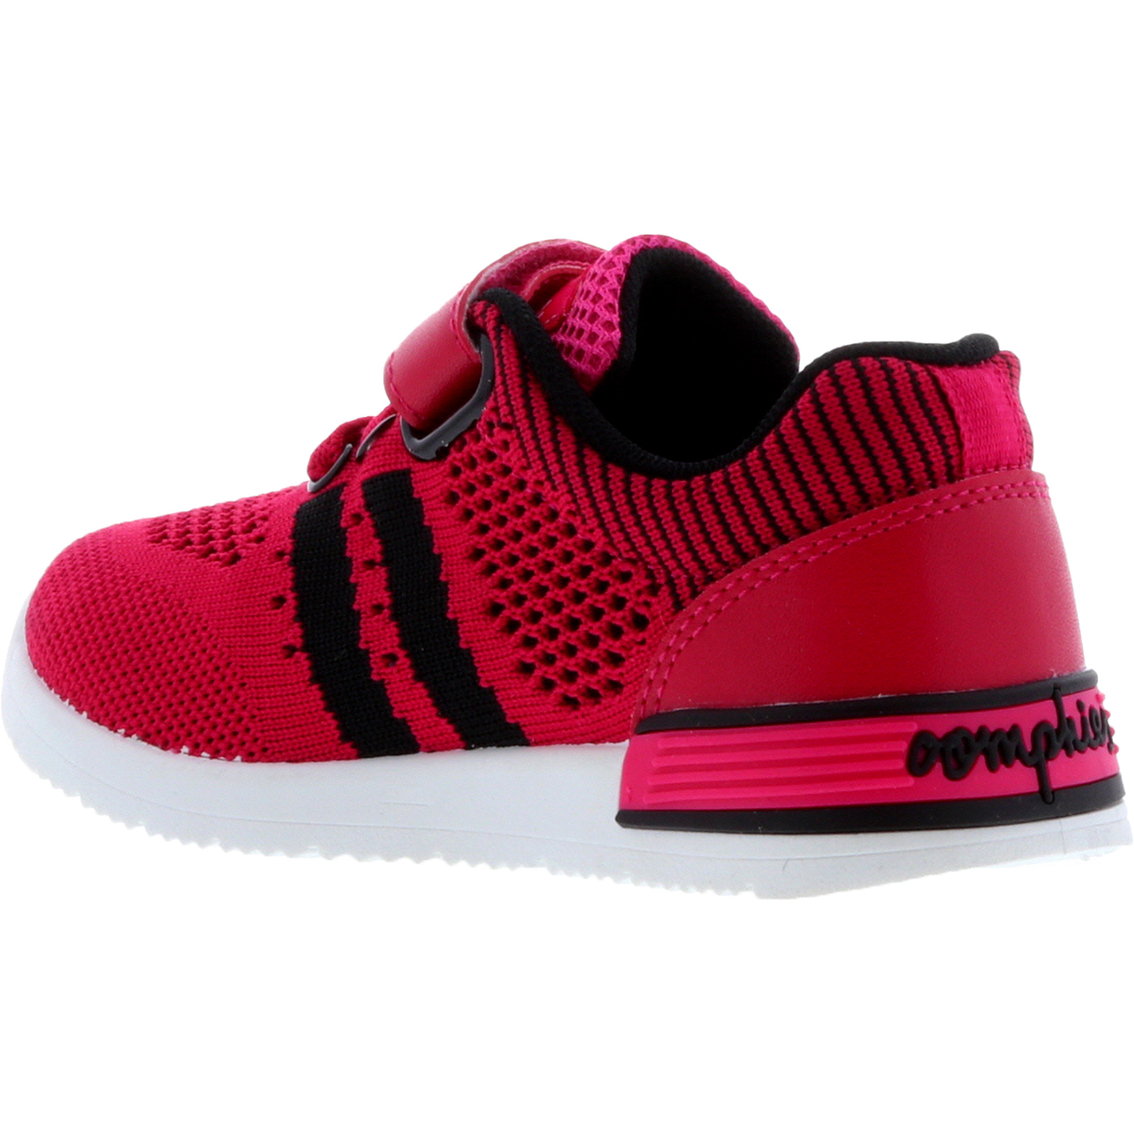 Oomphies Toddler Girls Wynn Knit Athletic Sneakers - Image 3 of 4